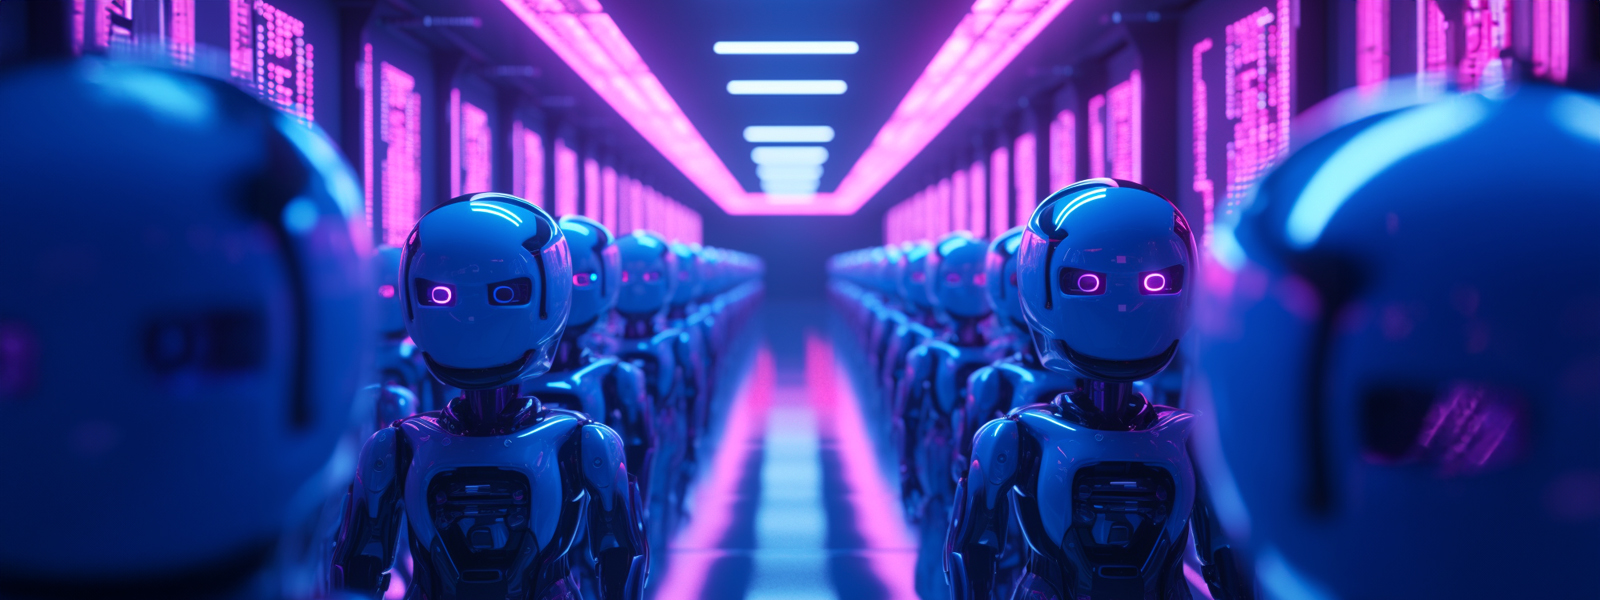 Rows of humanoid robots in a neon-lit server room.